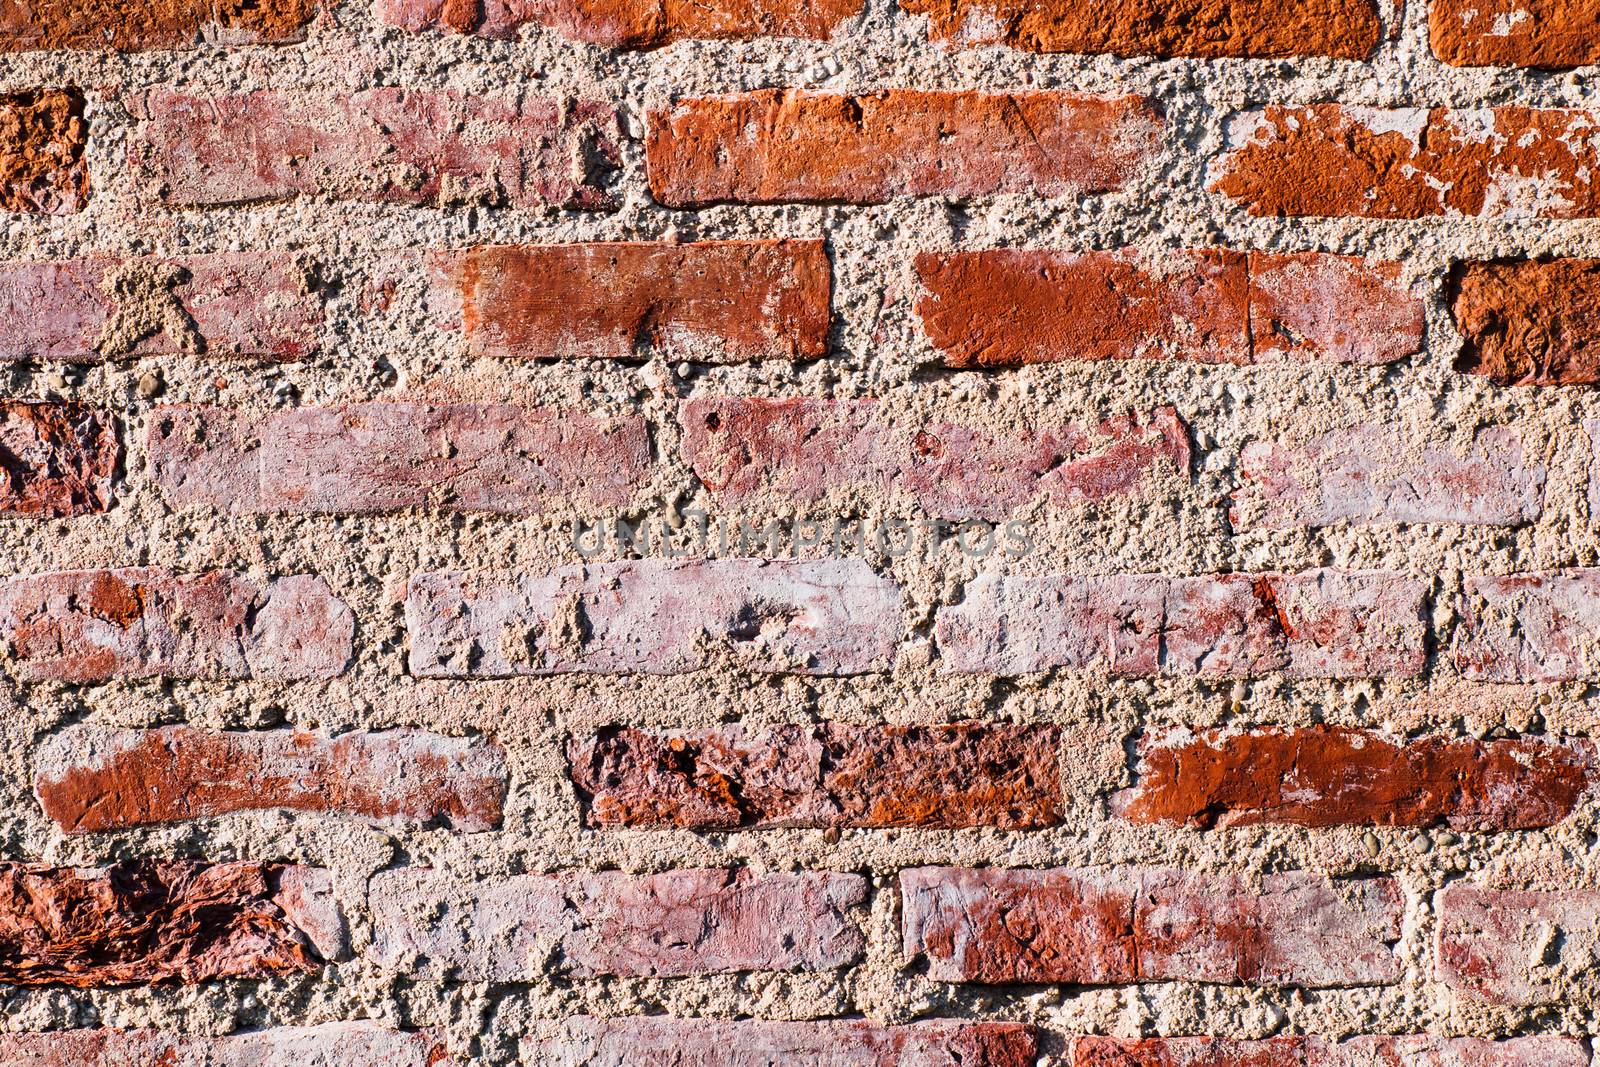 Marble Textured Background of Old Brick Wall. Abstract Brick Wall Surface.